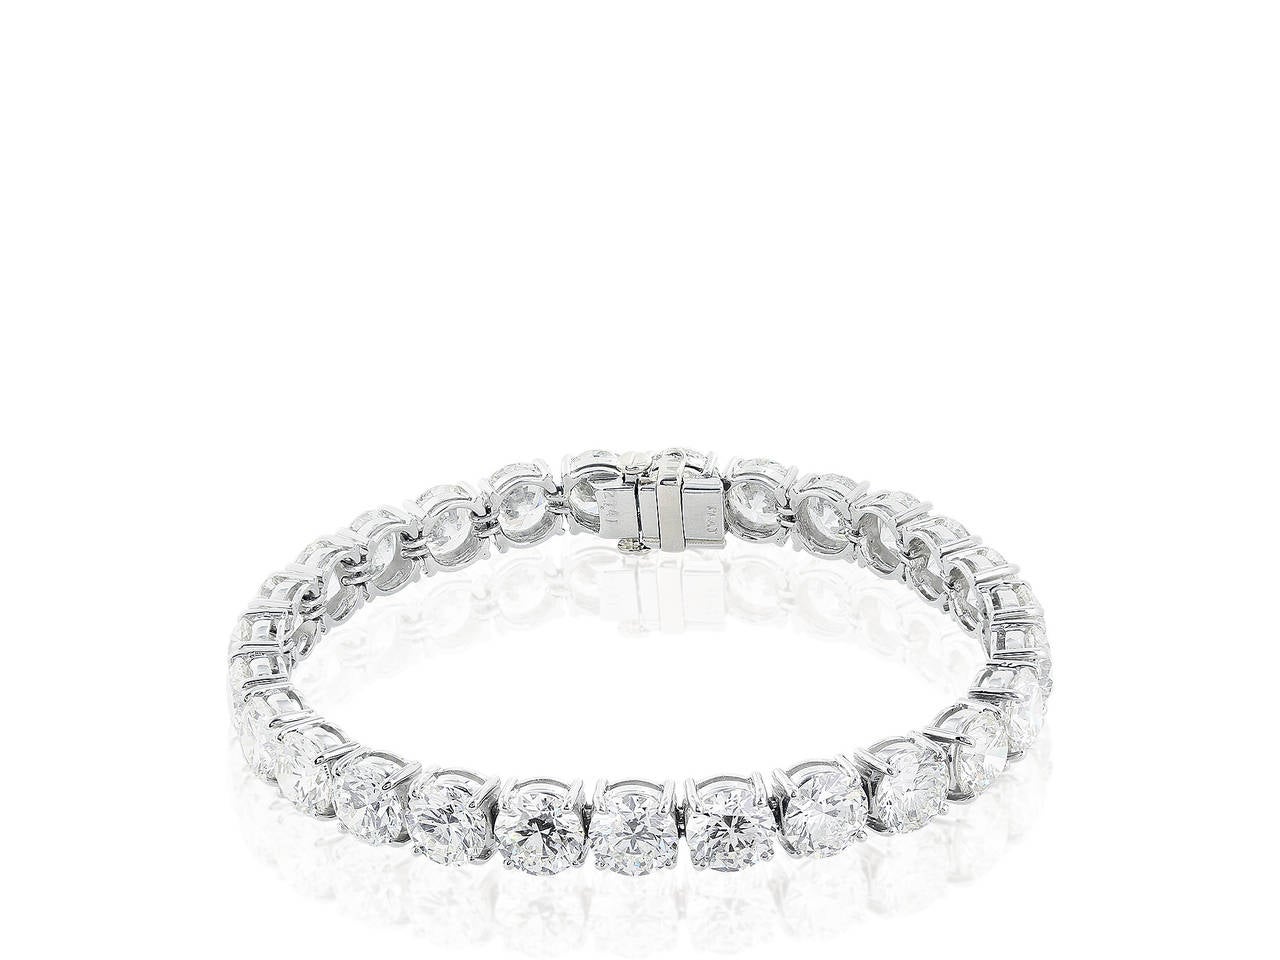 Platinum tennis bracelet consisting of 27 round brilliant diamonds weighing 27 carats with a color and clarity of F VS2-SI1 respectively.